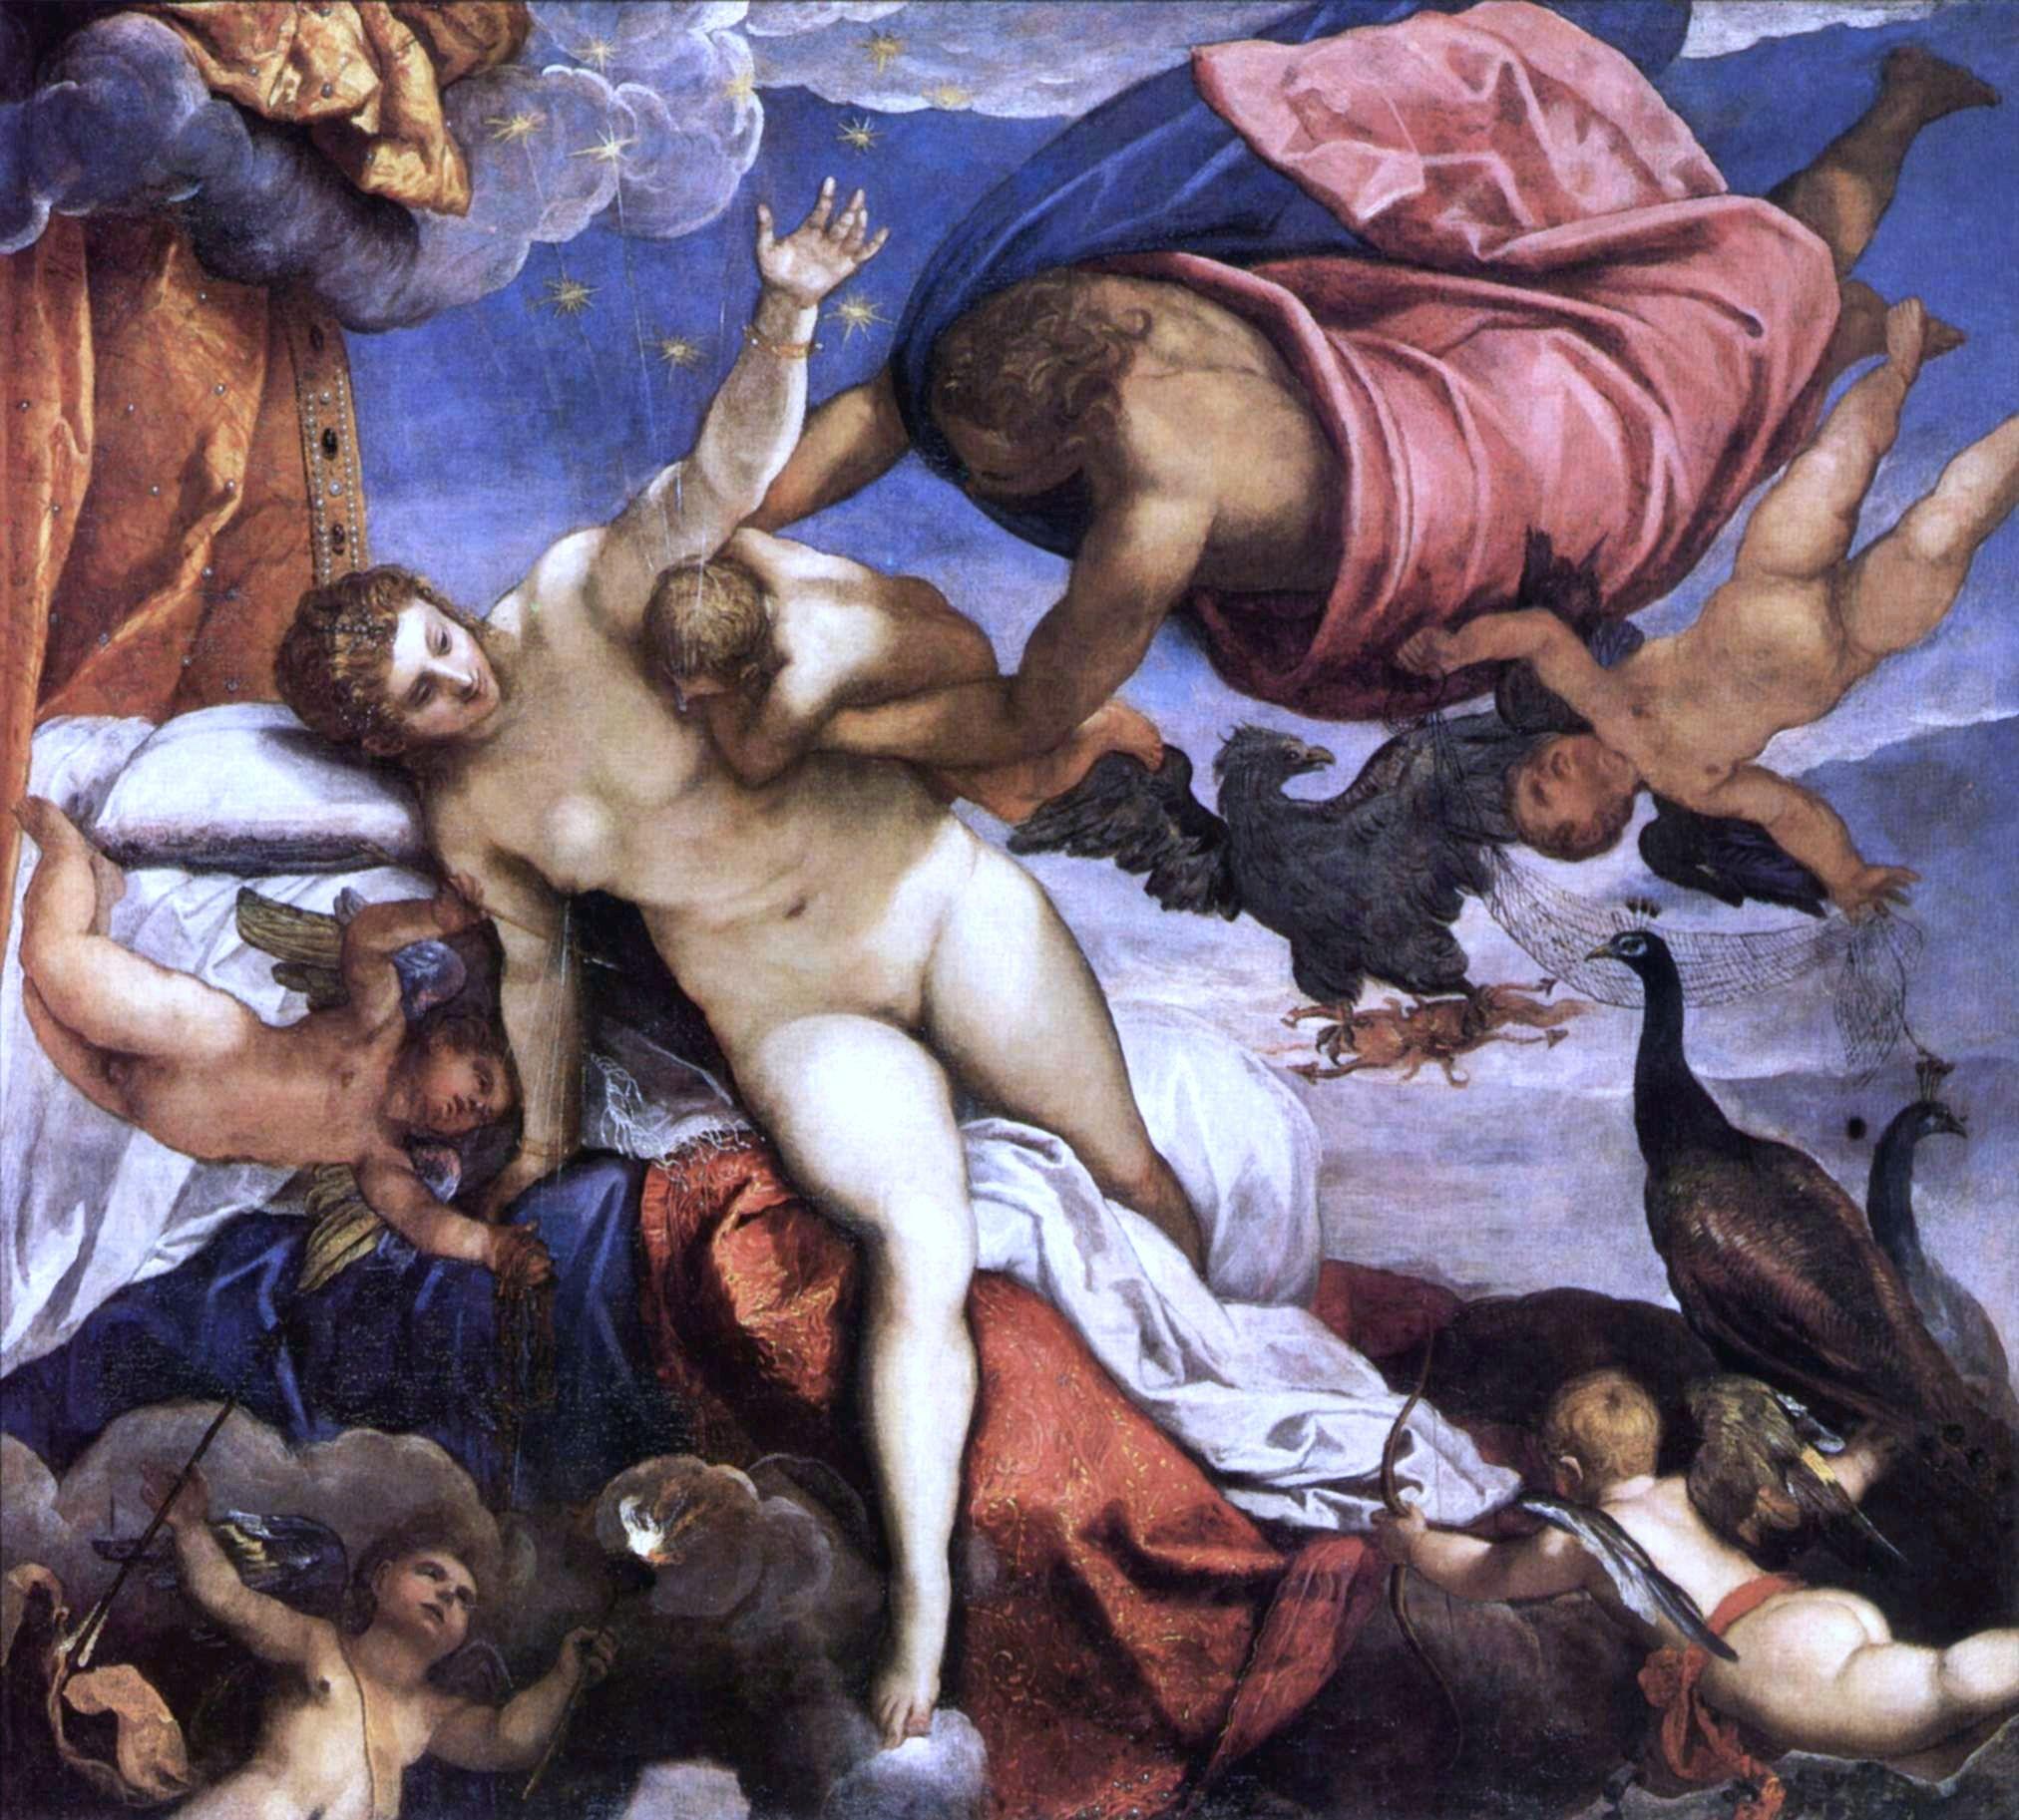 A square painting of a nude woman in the sky, arm outstretched and supported by white sheets, blue and red blankets, and four putti as a flying robed man holds a baby to her breast.